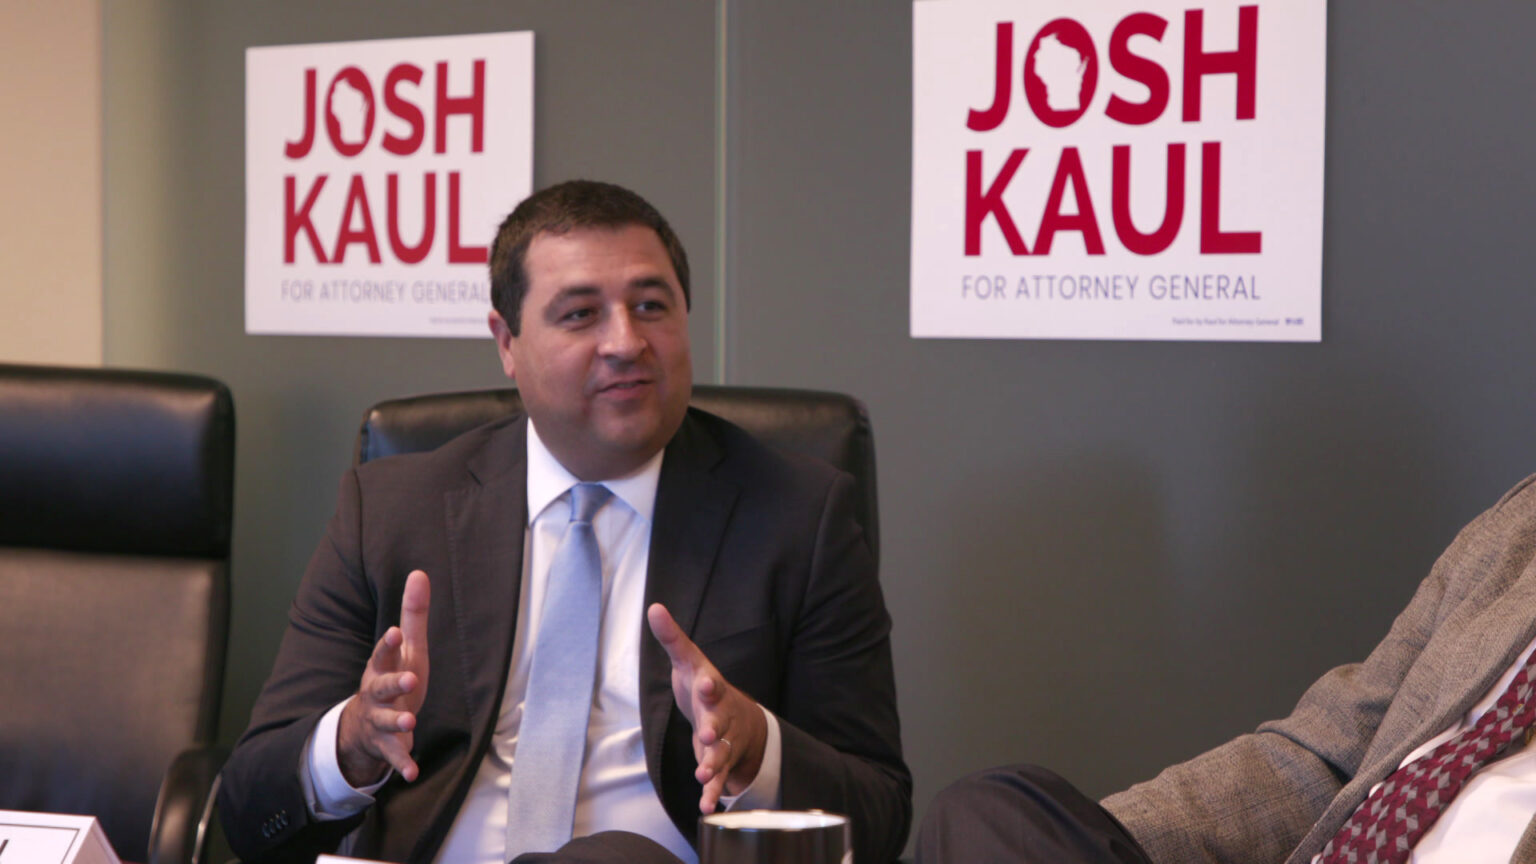 Josh Kaul sits in an office chair and gestures with both hands, with two of his campaign signs attached to the wall in the background.